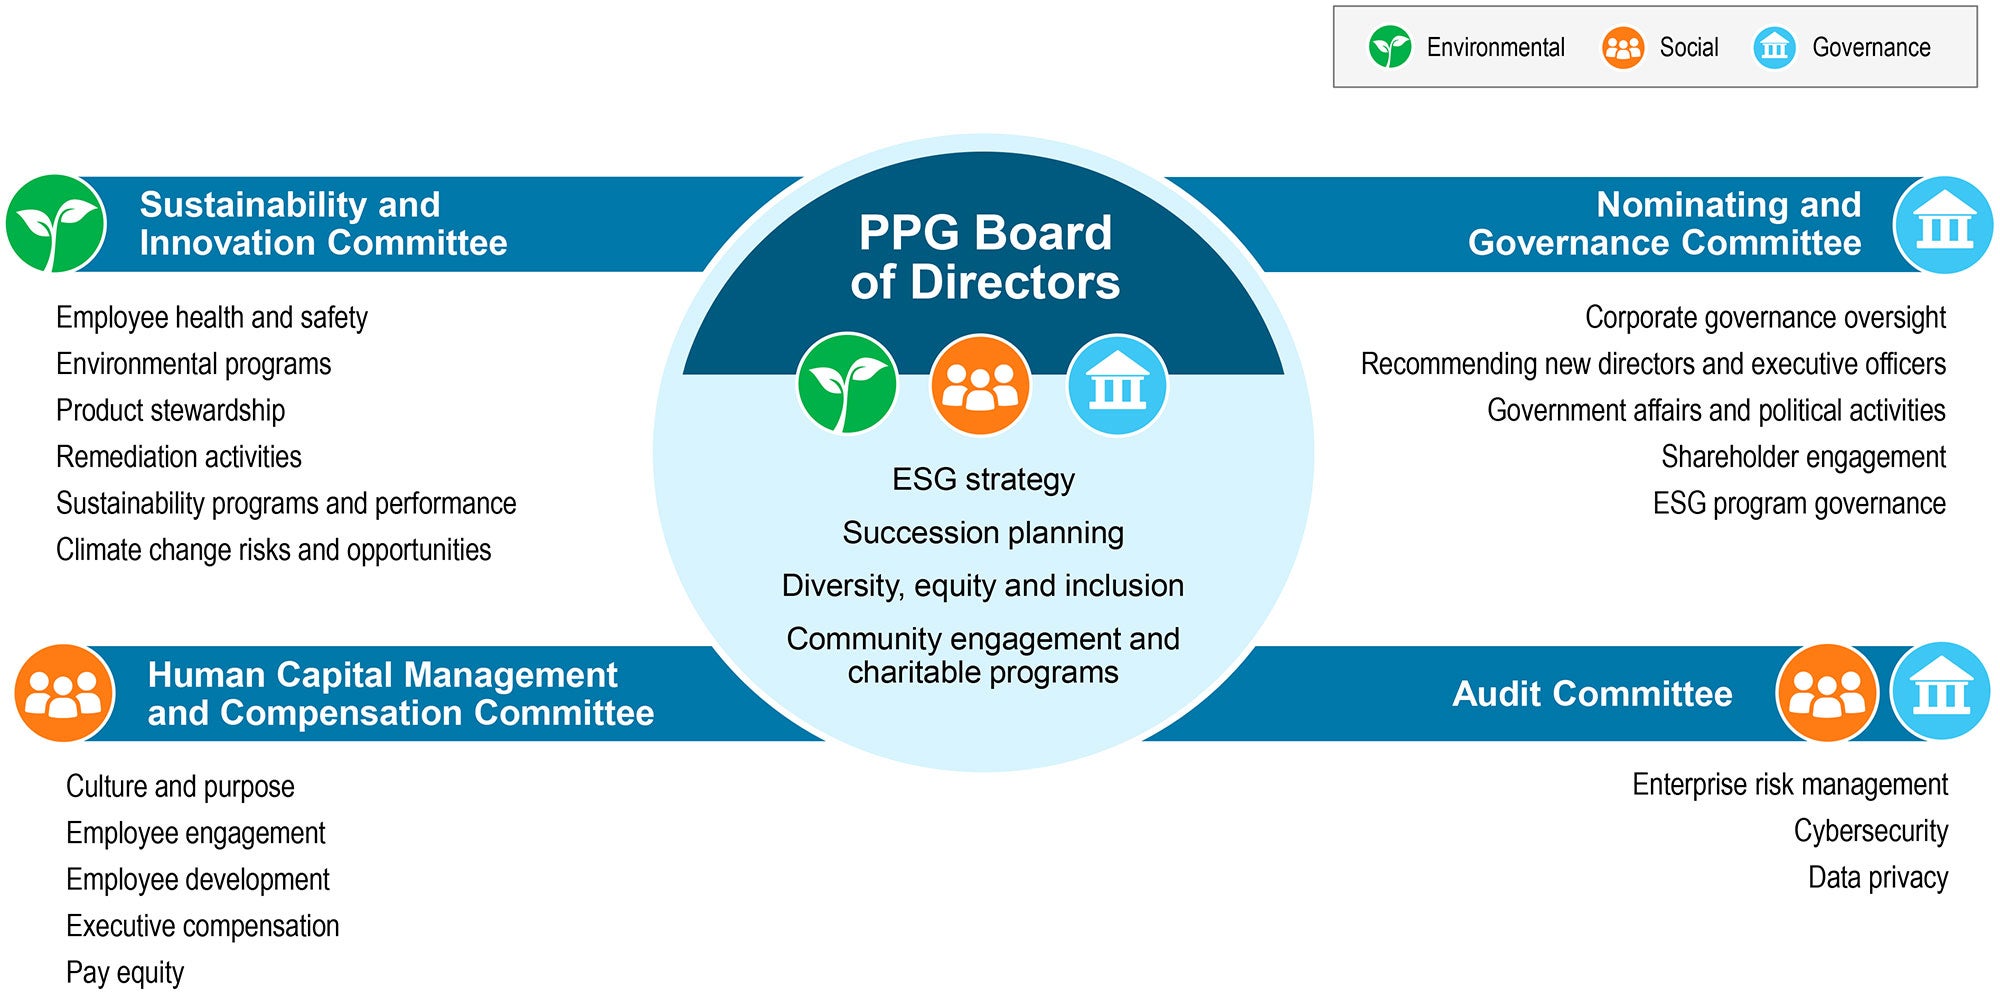 Diagram of environmental, social and governance of PPG Board of Directors